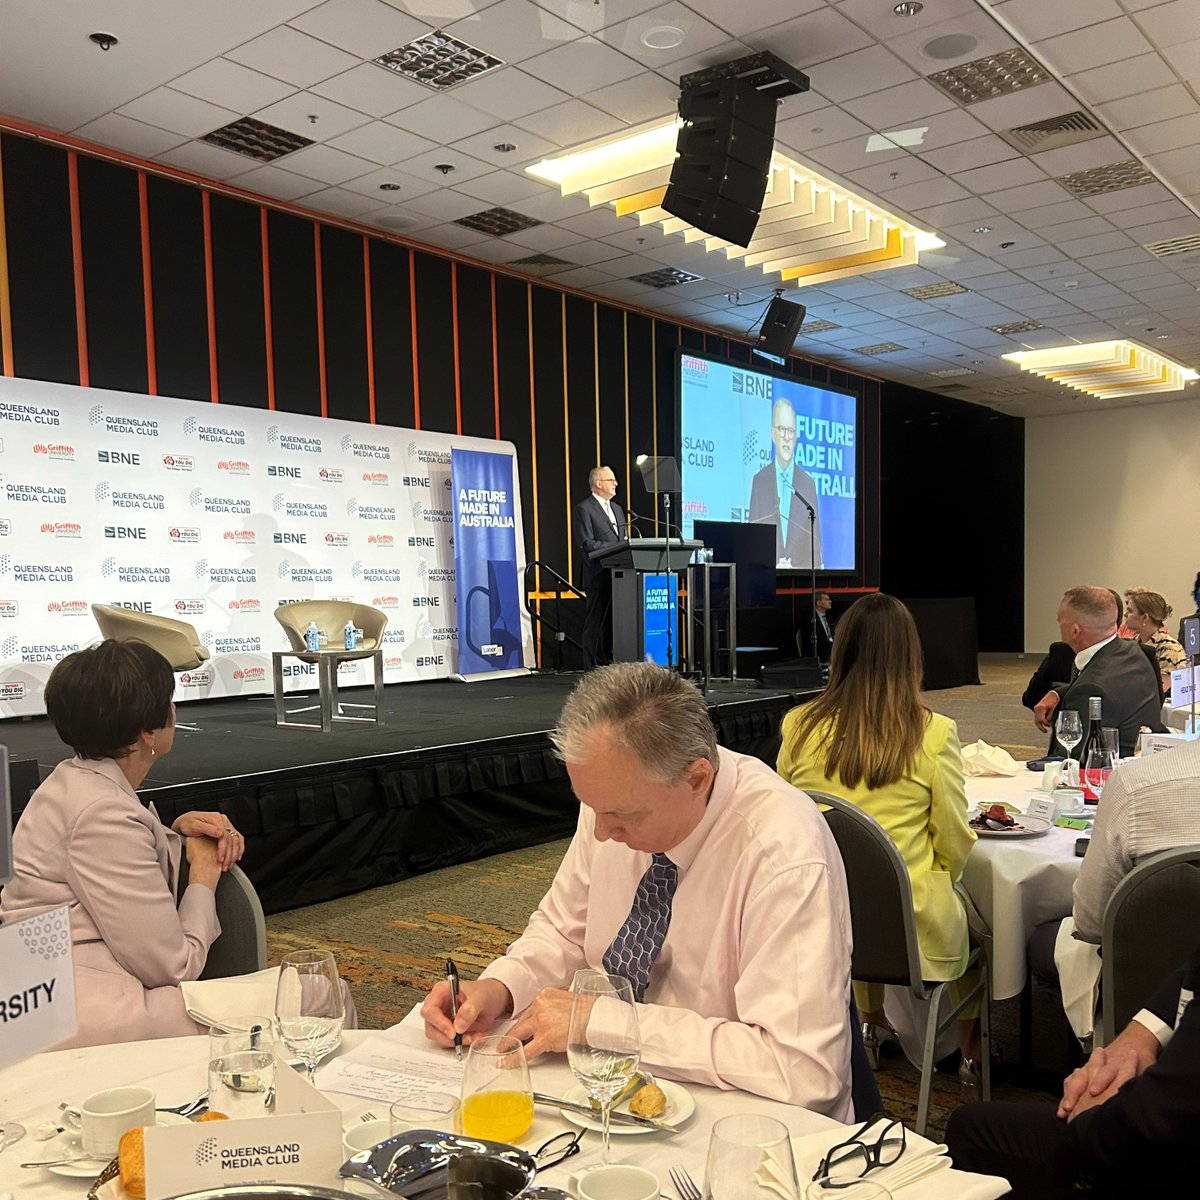 Griffith University political scientist Associate Professor Paul Williams taking notes listening to @AlboMP outline the nation’s future at the @qldmediaclub lunch #qmc